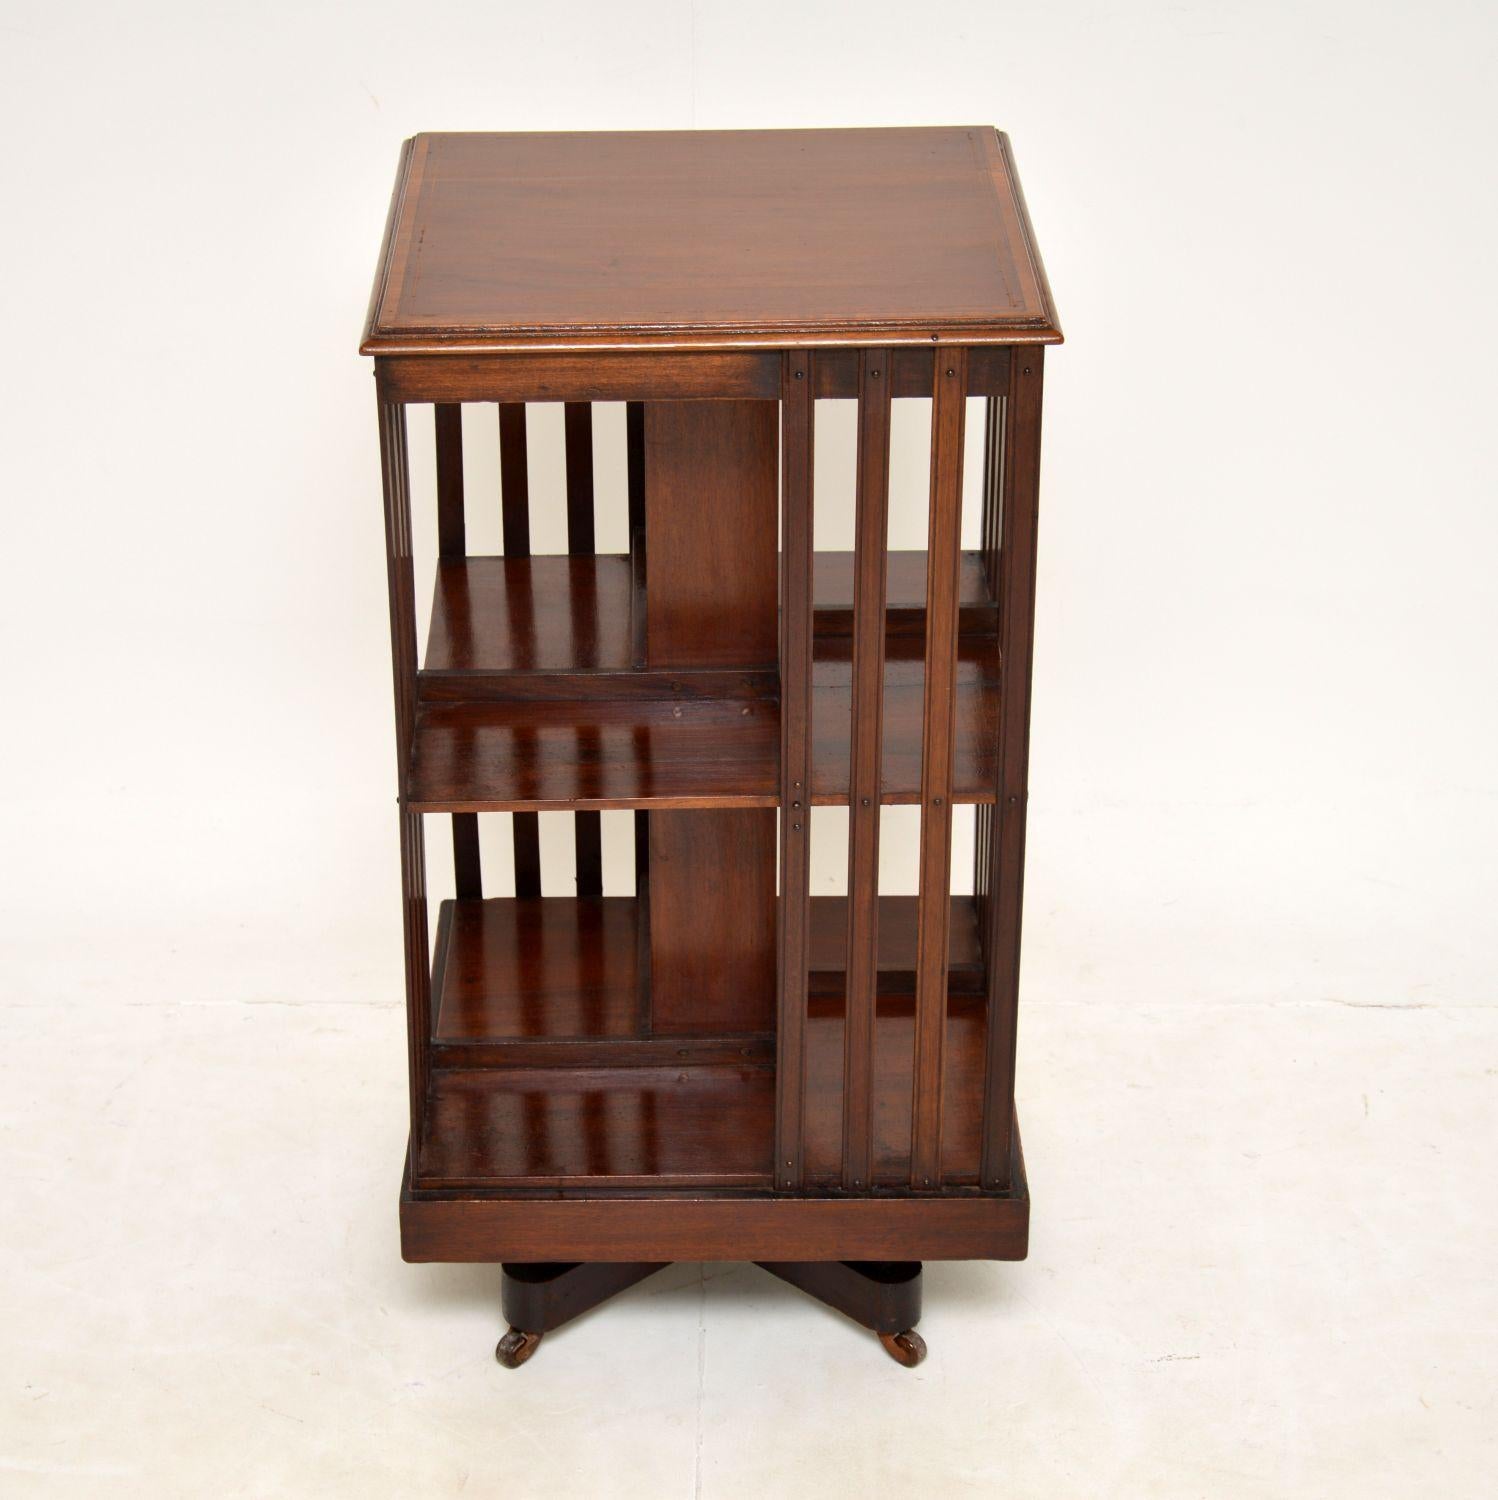 A lovely original antique Edwardian revolving bookcase. This was made in England, it dates from around the 1900-1910 period.

It is of excellent quality and is a very useful item. It is finished on all four sides with open bookshelves and vertical